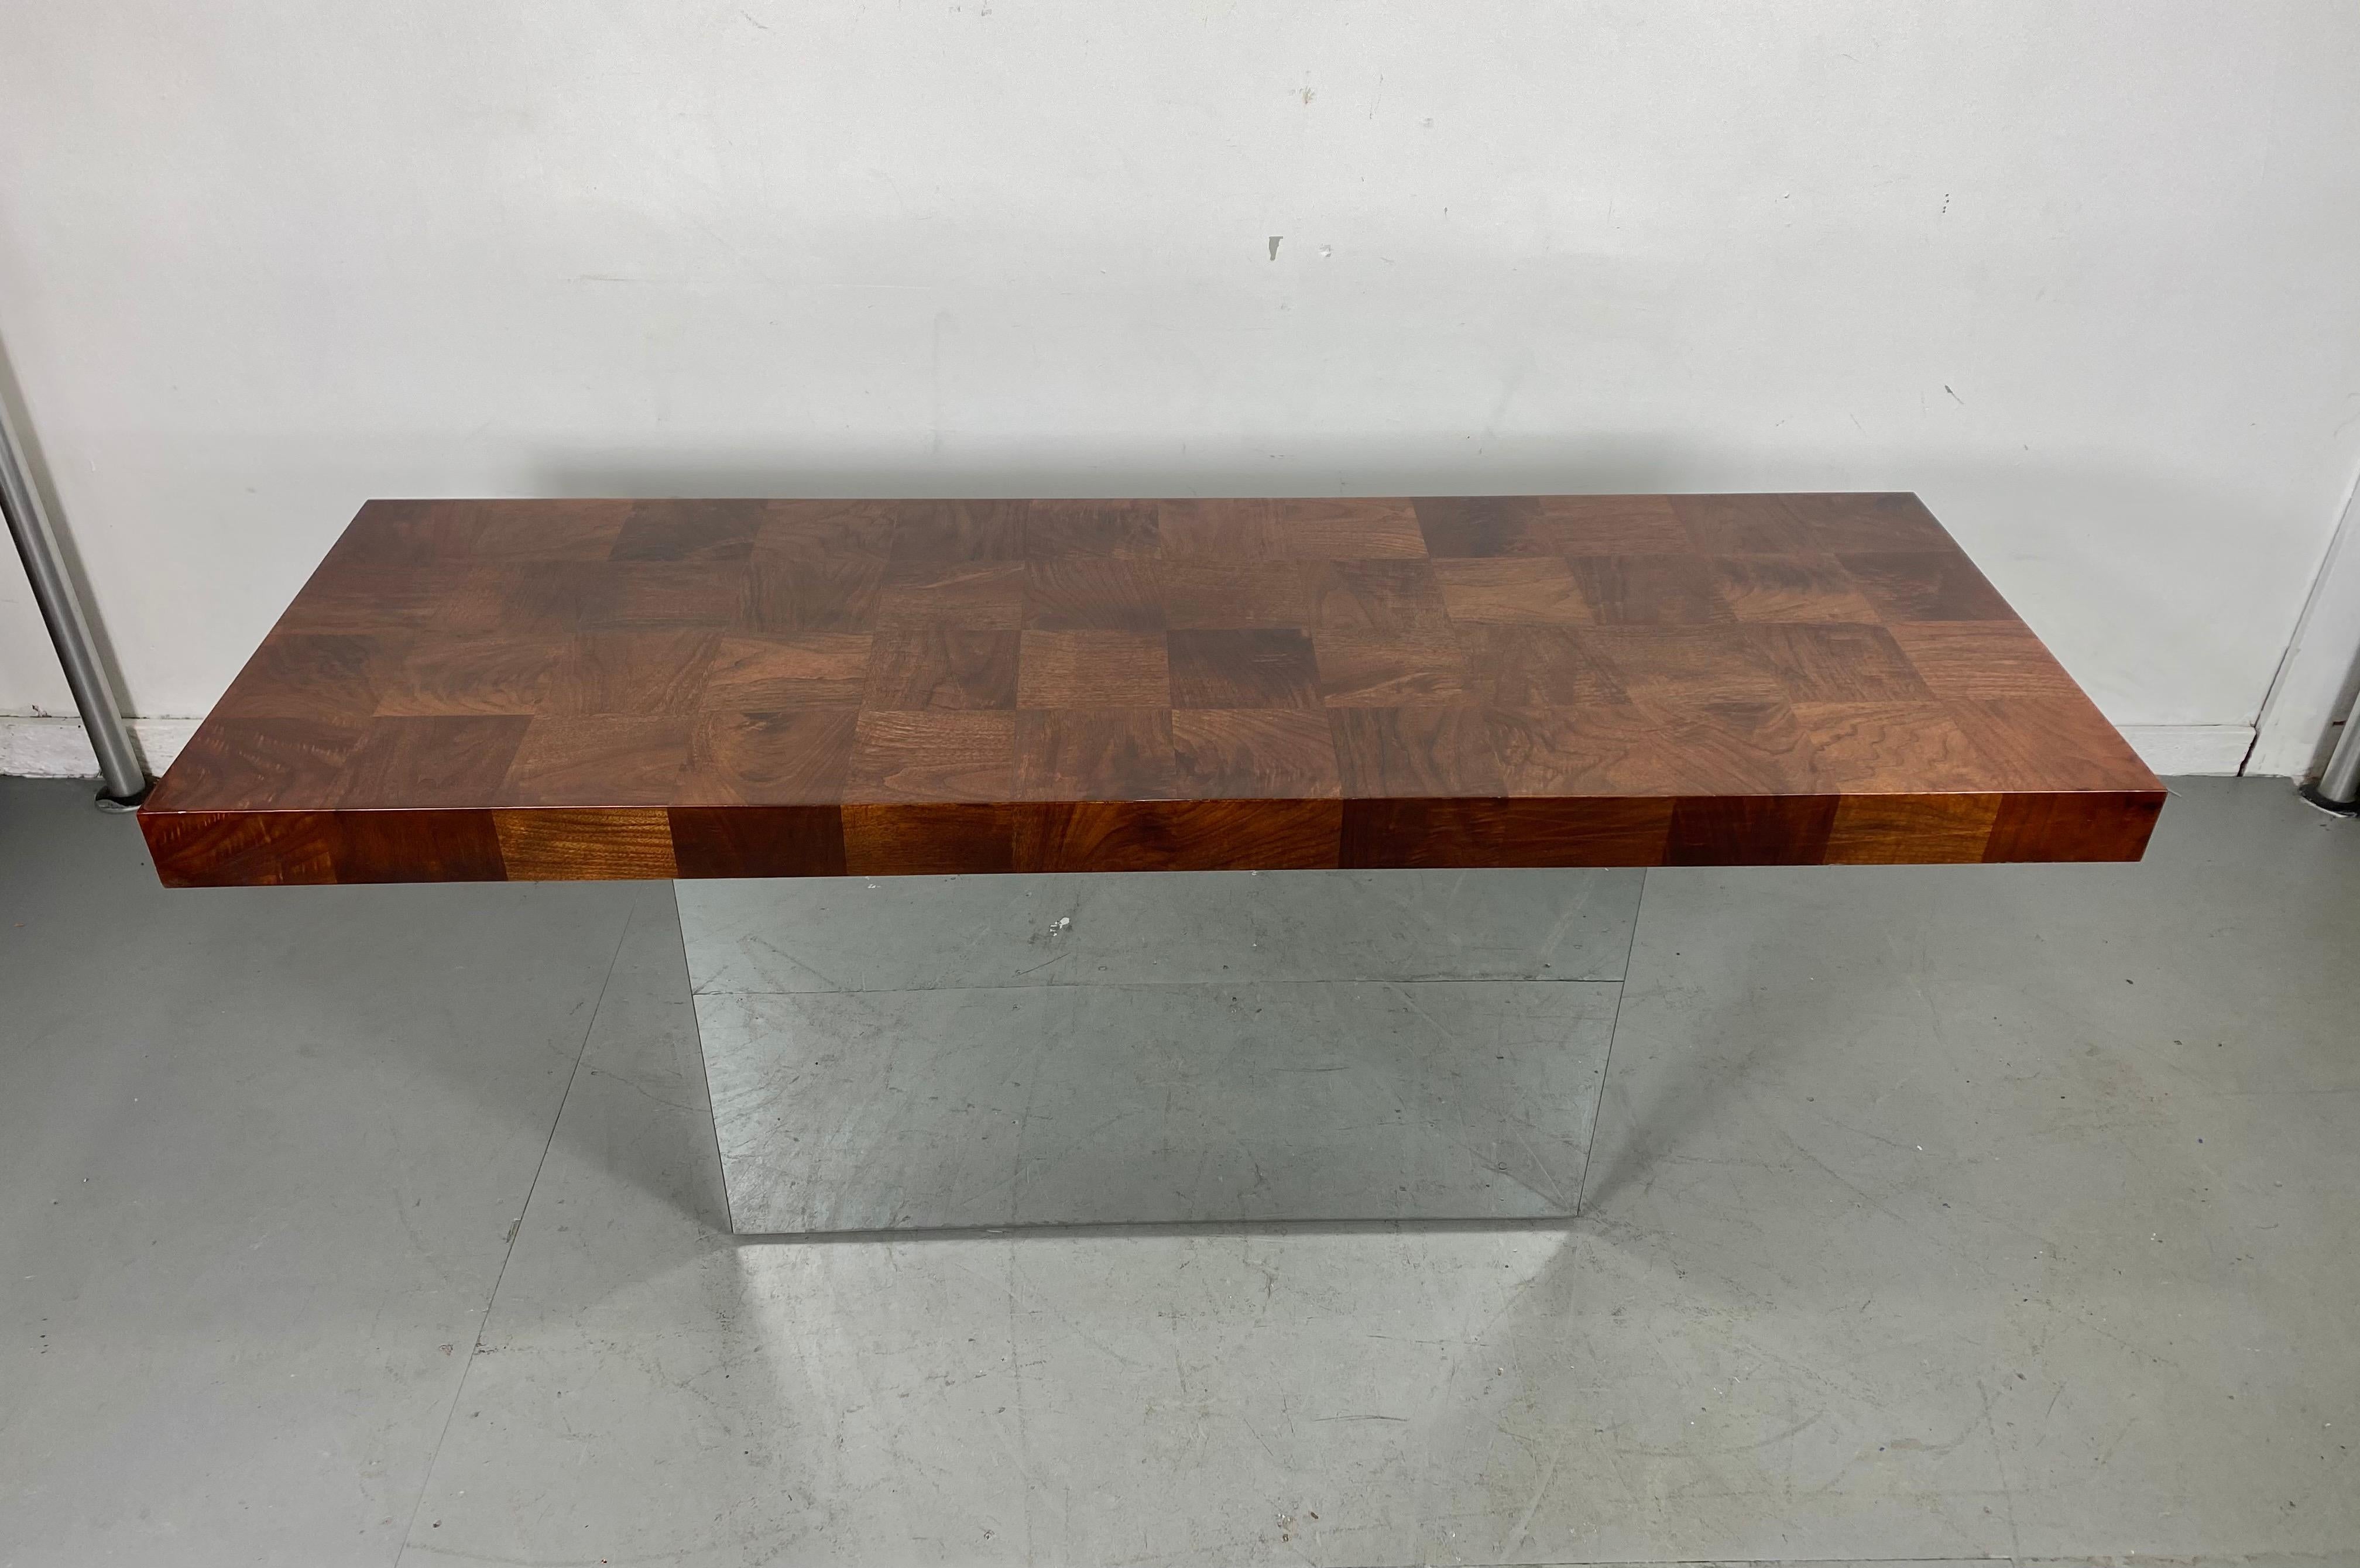 Classic Milo Baughman for Thayer Coggin patchwork burl wood and chrome console table, Stunning example in amazing original condition, fit seamlessly into any modernist, contemporary, ecclectic environment, hand delivery avail to New York City or